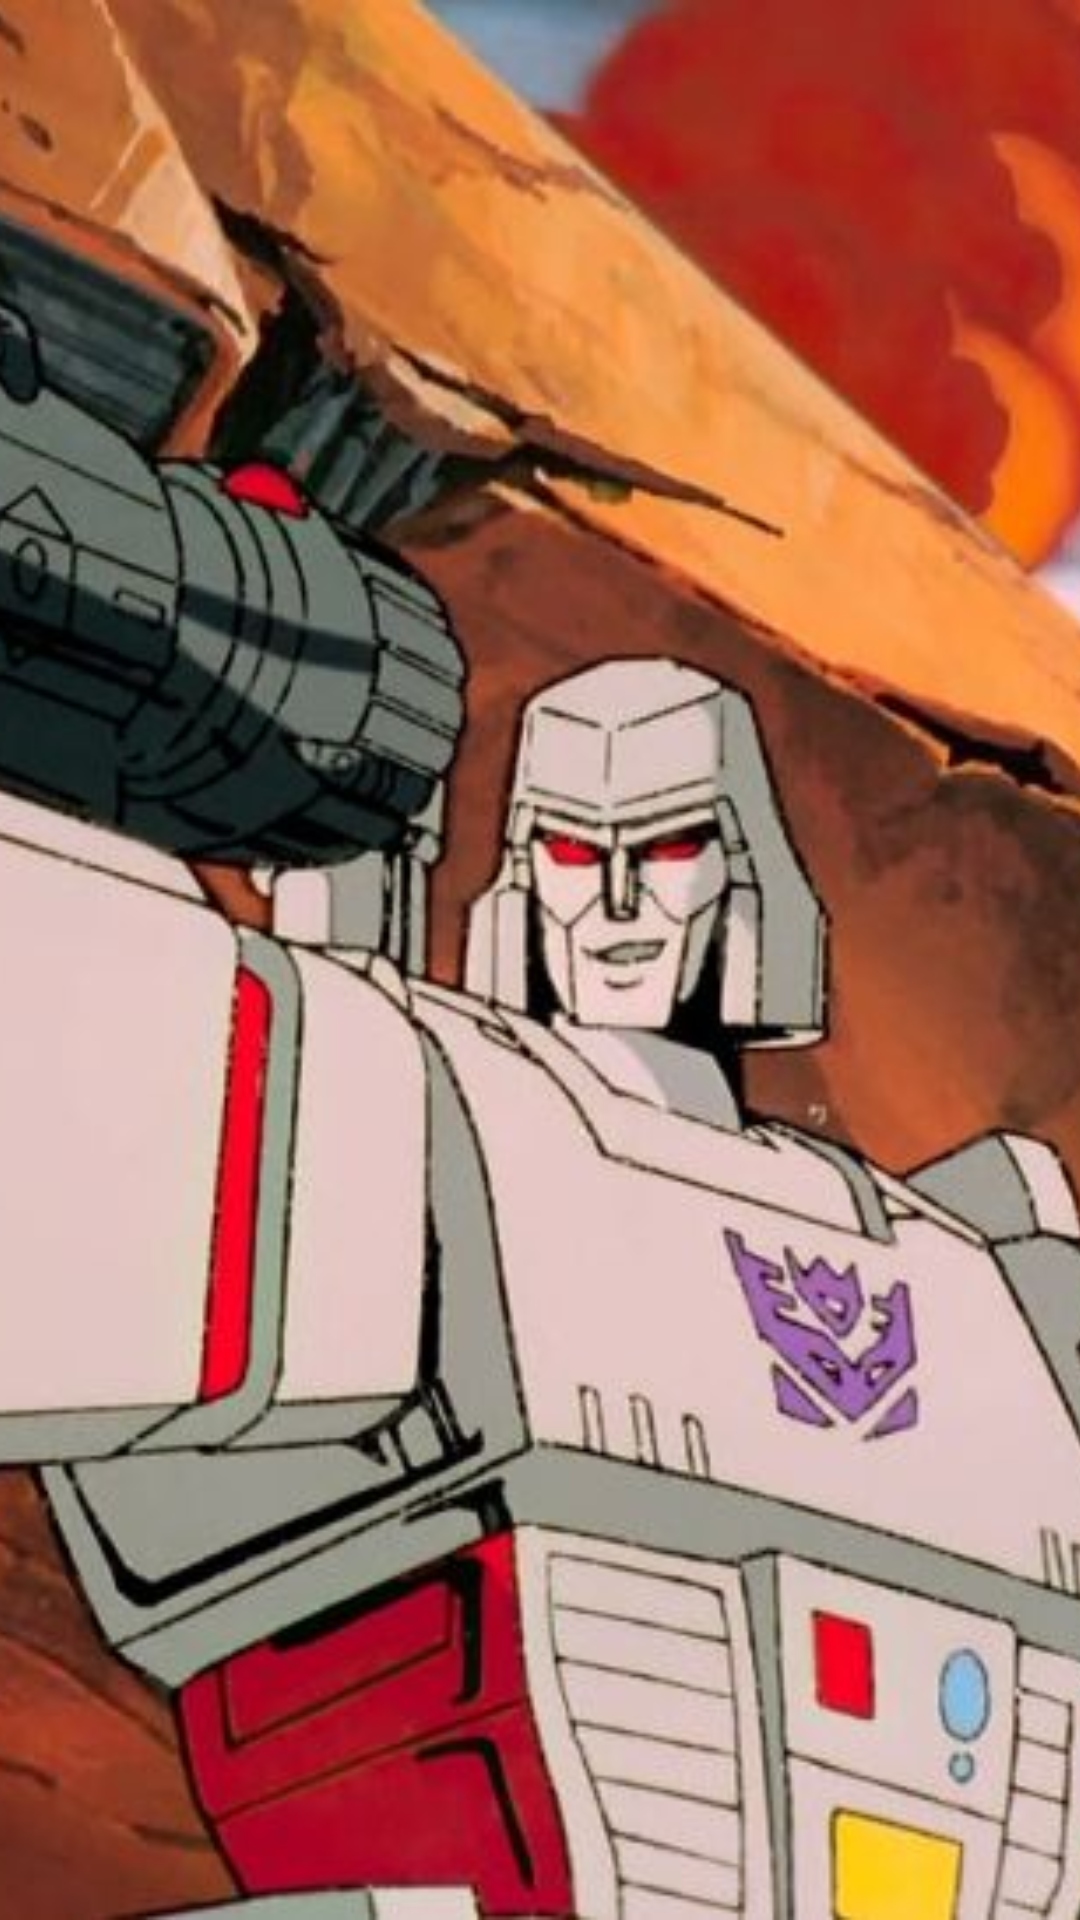 Megatron FROM Transformers The Movie 1986